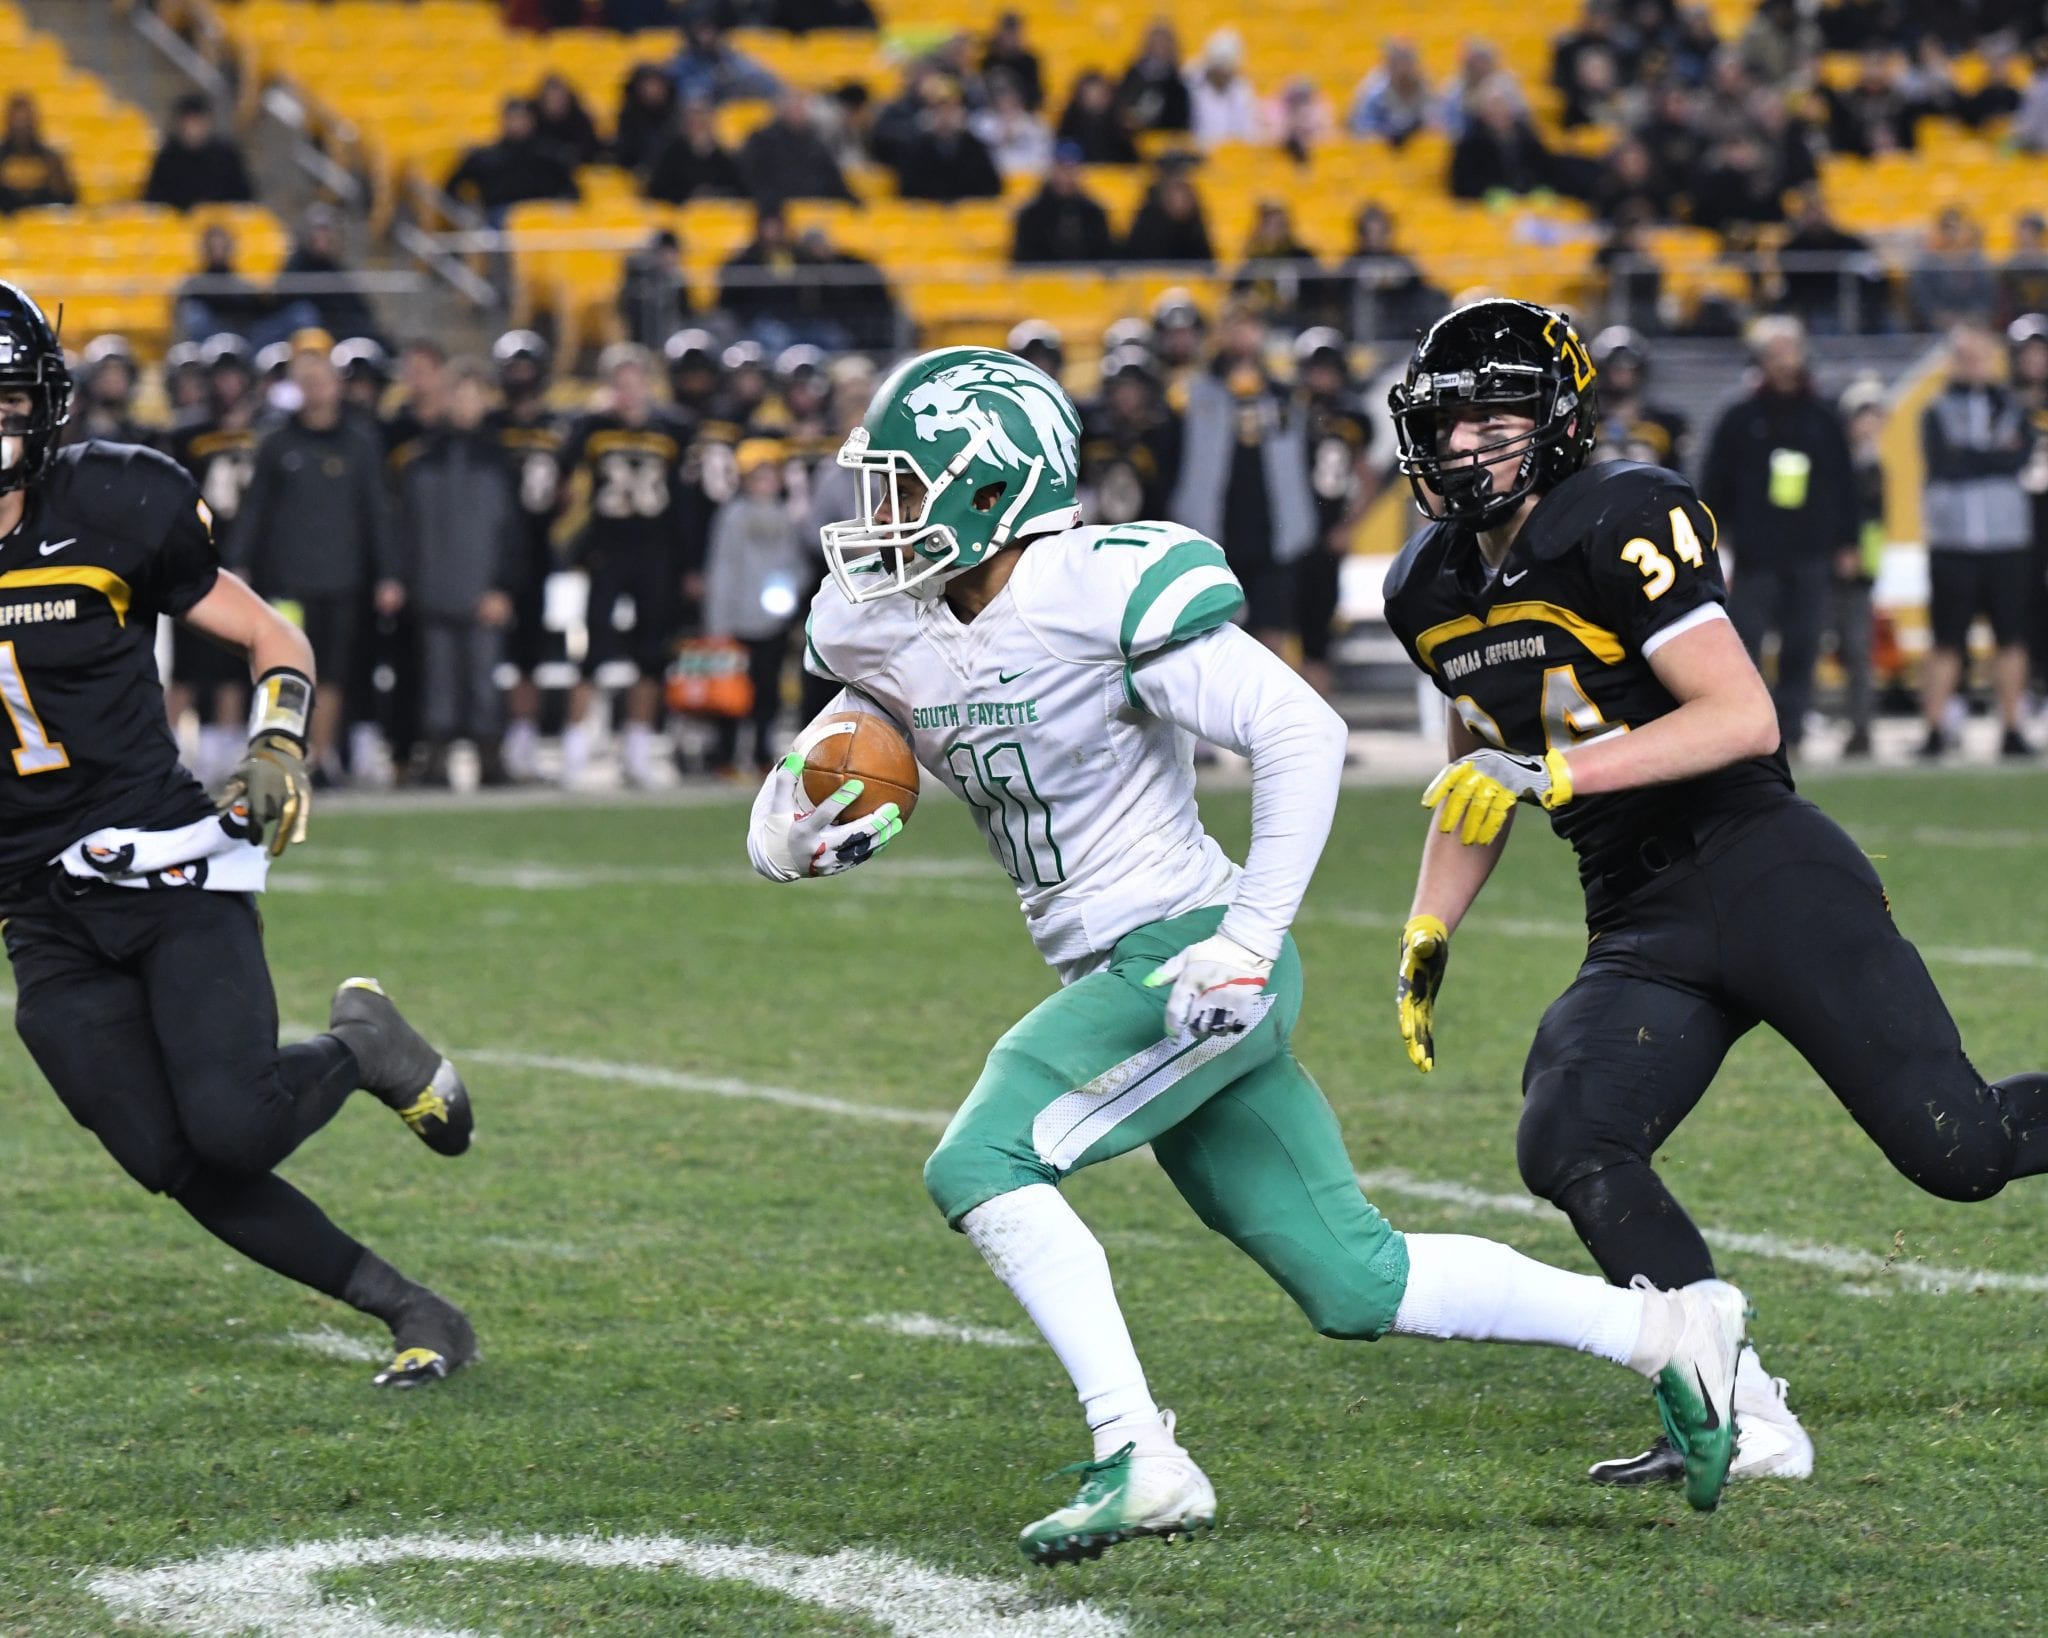 South Fayette Comes from Behind to Snap TJ's Title Streak | Pittsburgh Sports Now